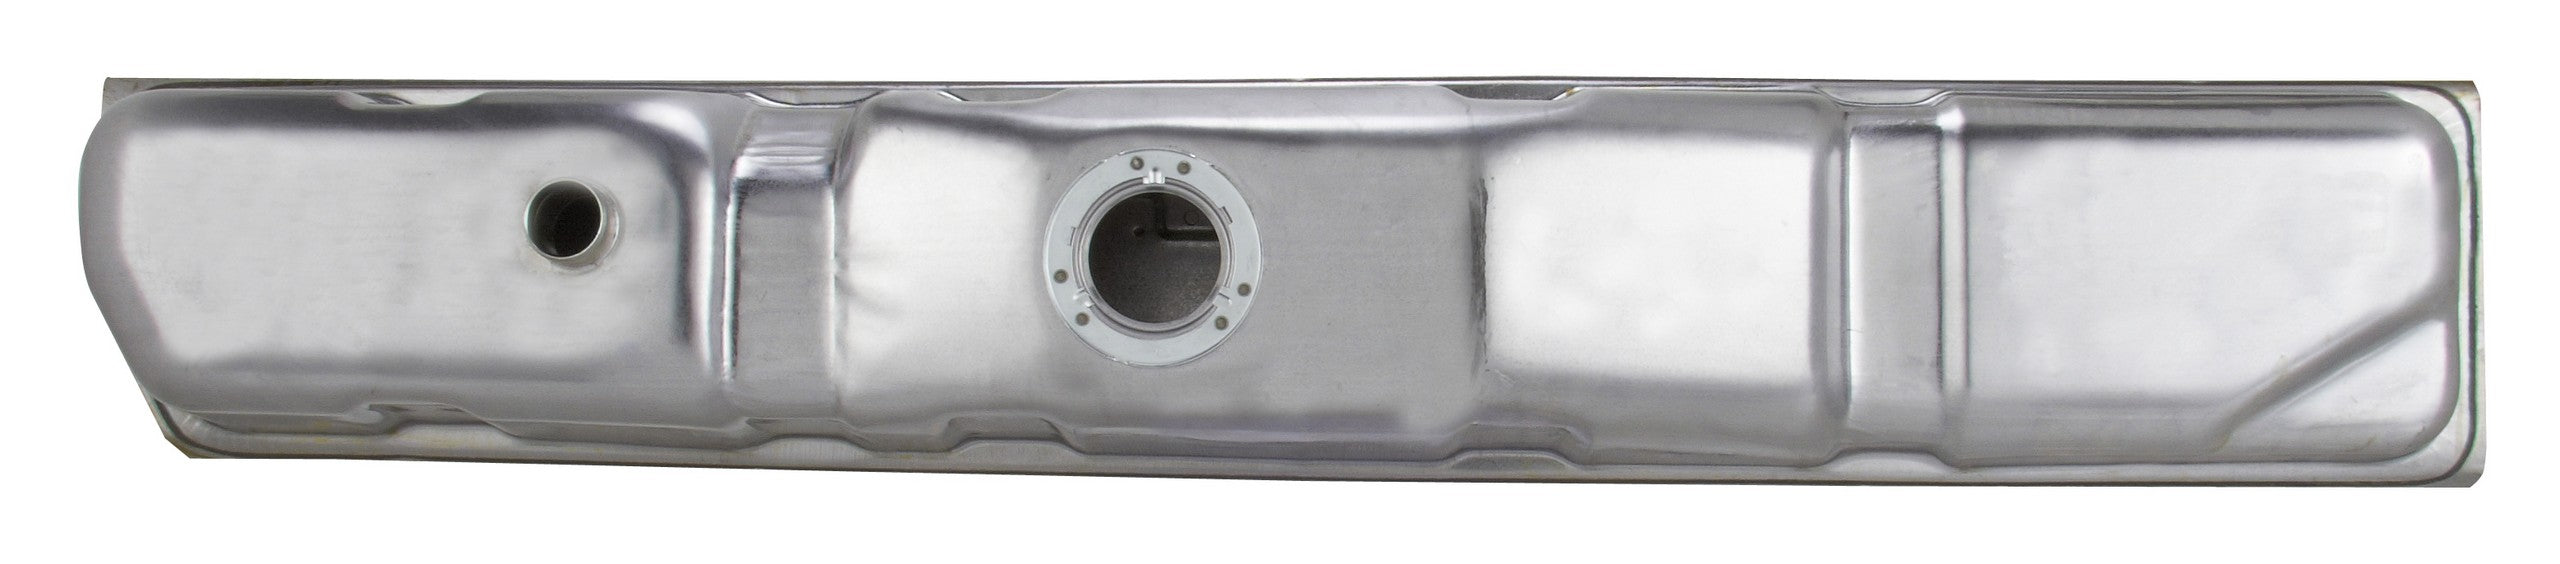 Fuel Tank for Chevrolet C3500 Cab & Chassis GAS 1997 1996 1995 1994 1993 1992 1991 1990 - Spectra GM62B